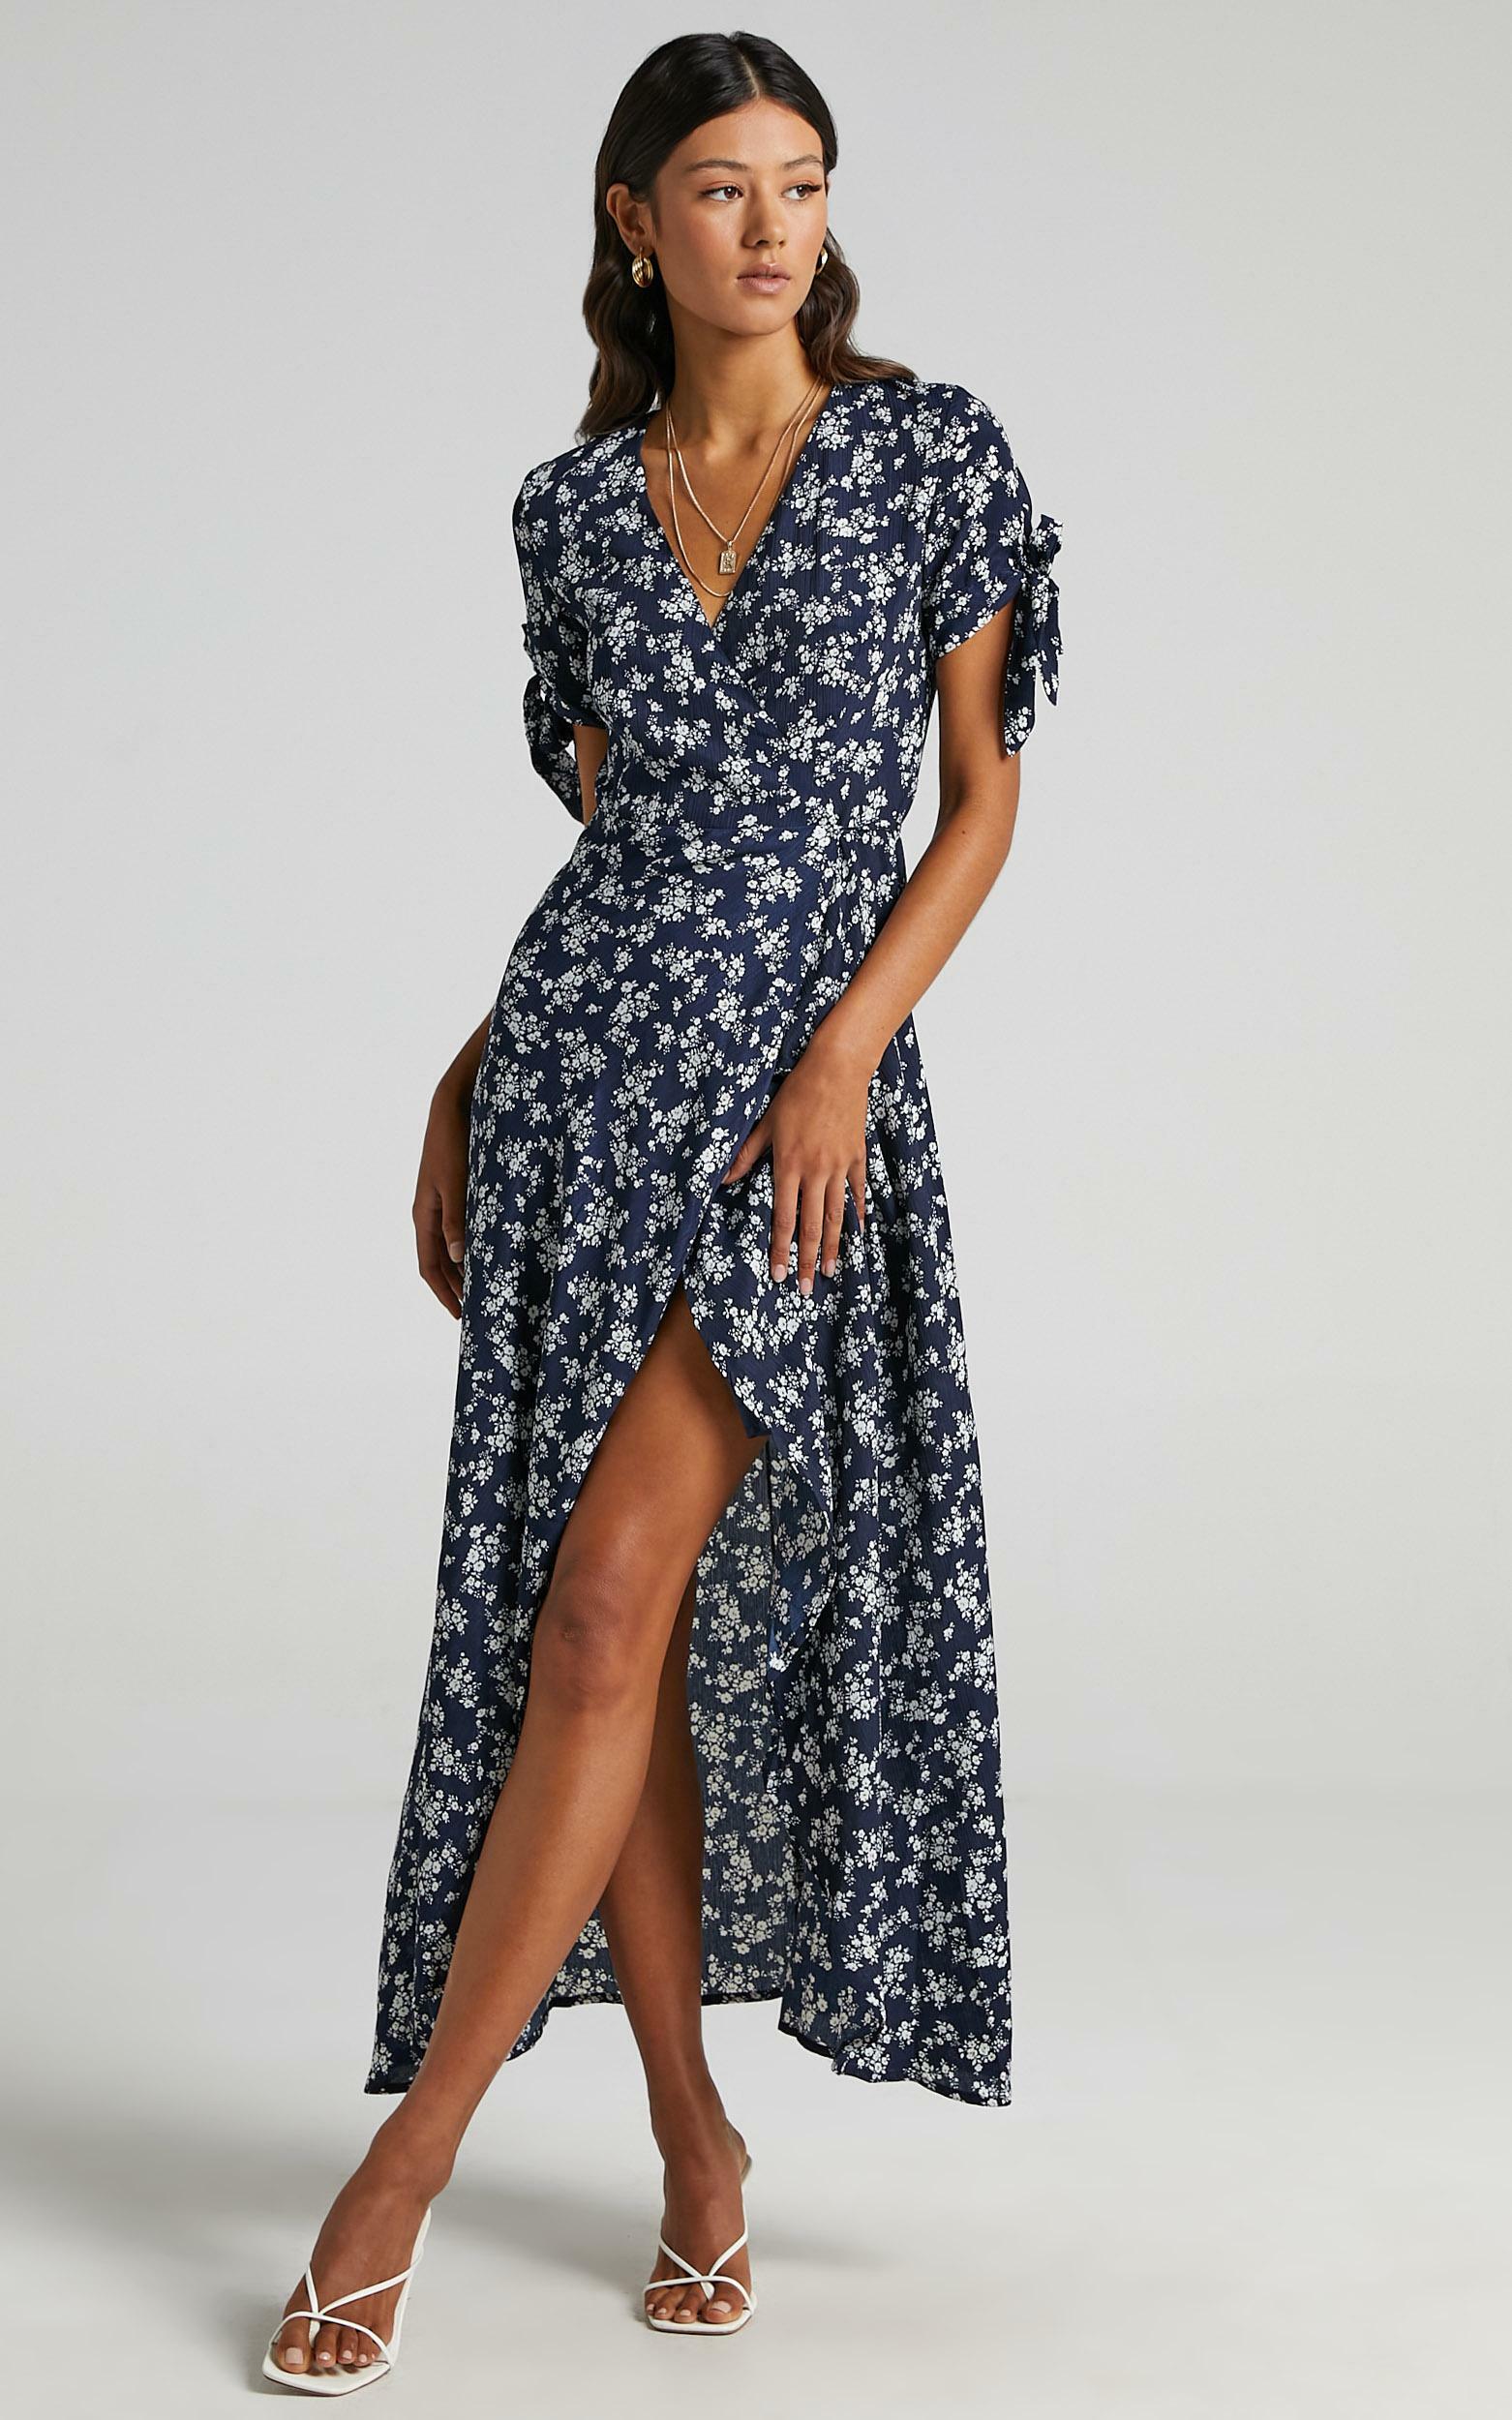 Picking It Up Wrap Maxi Dress in Navy Floral - 06, NVY4, hi-res image number null